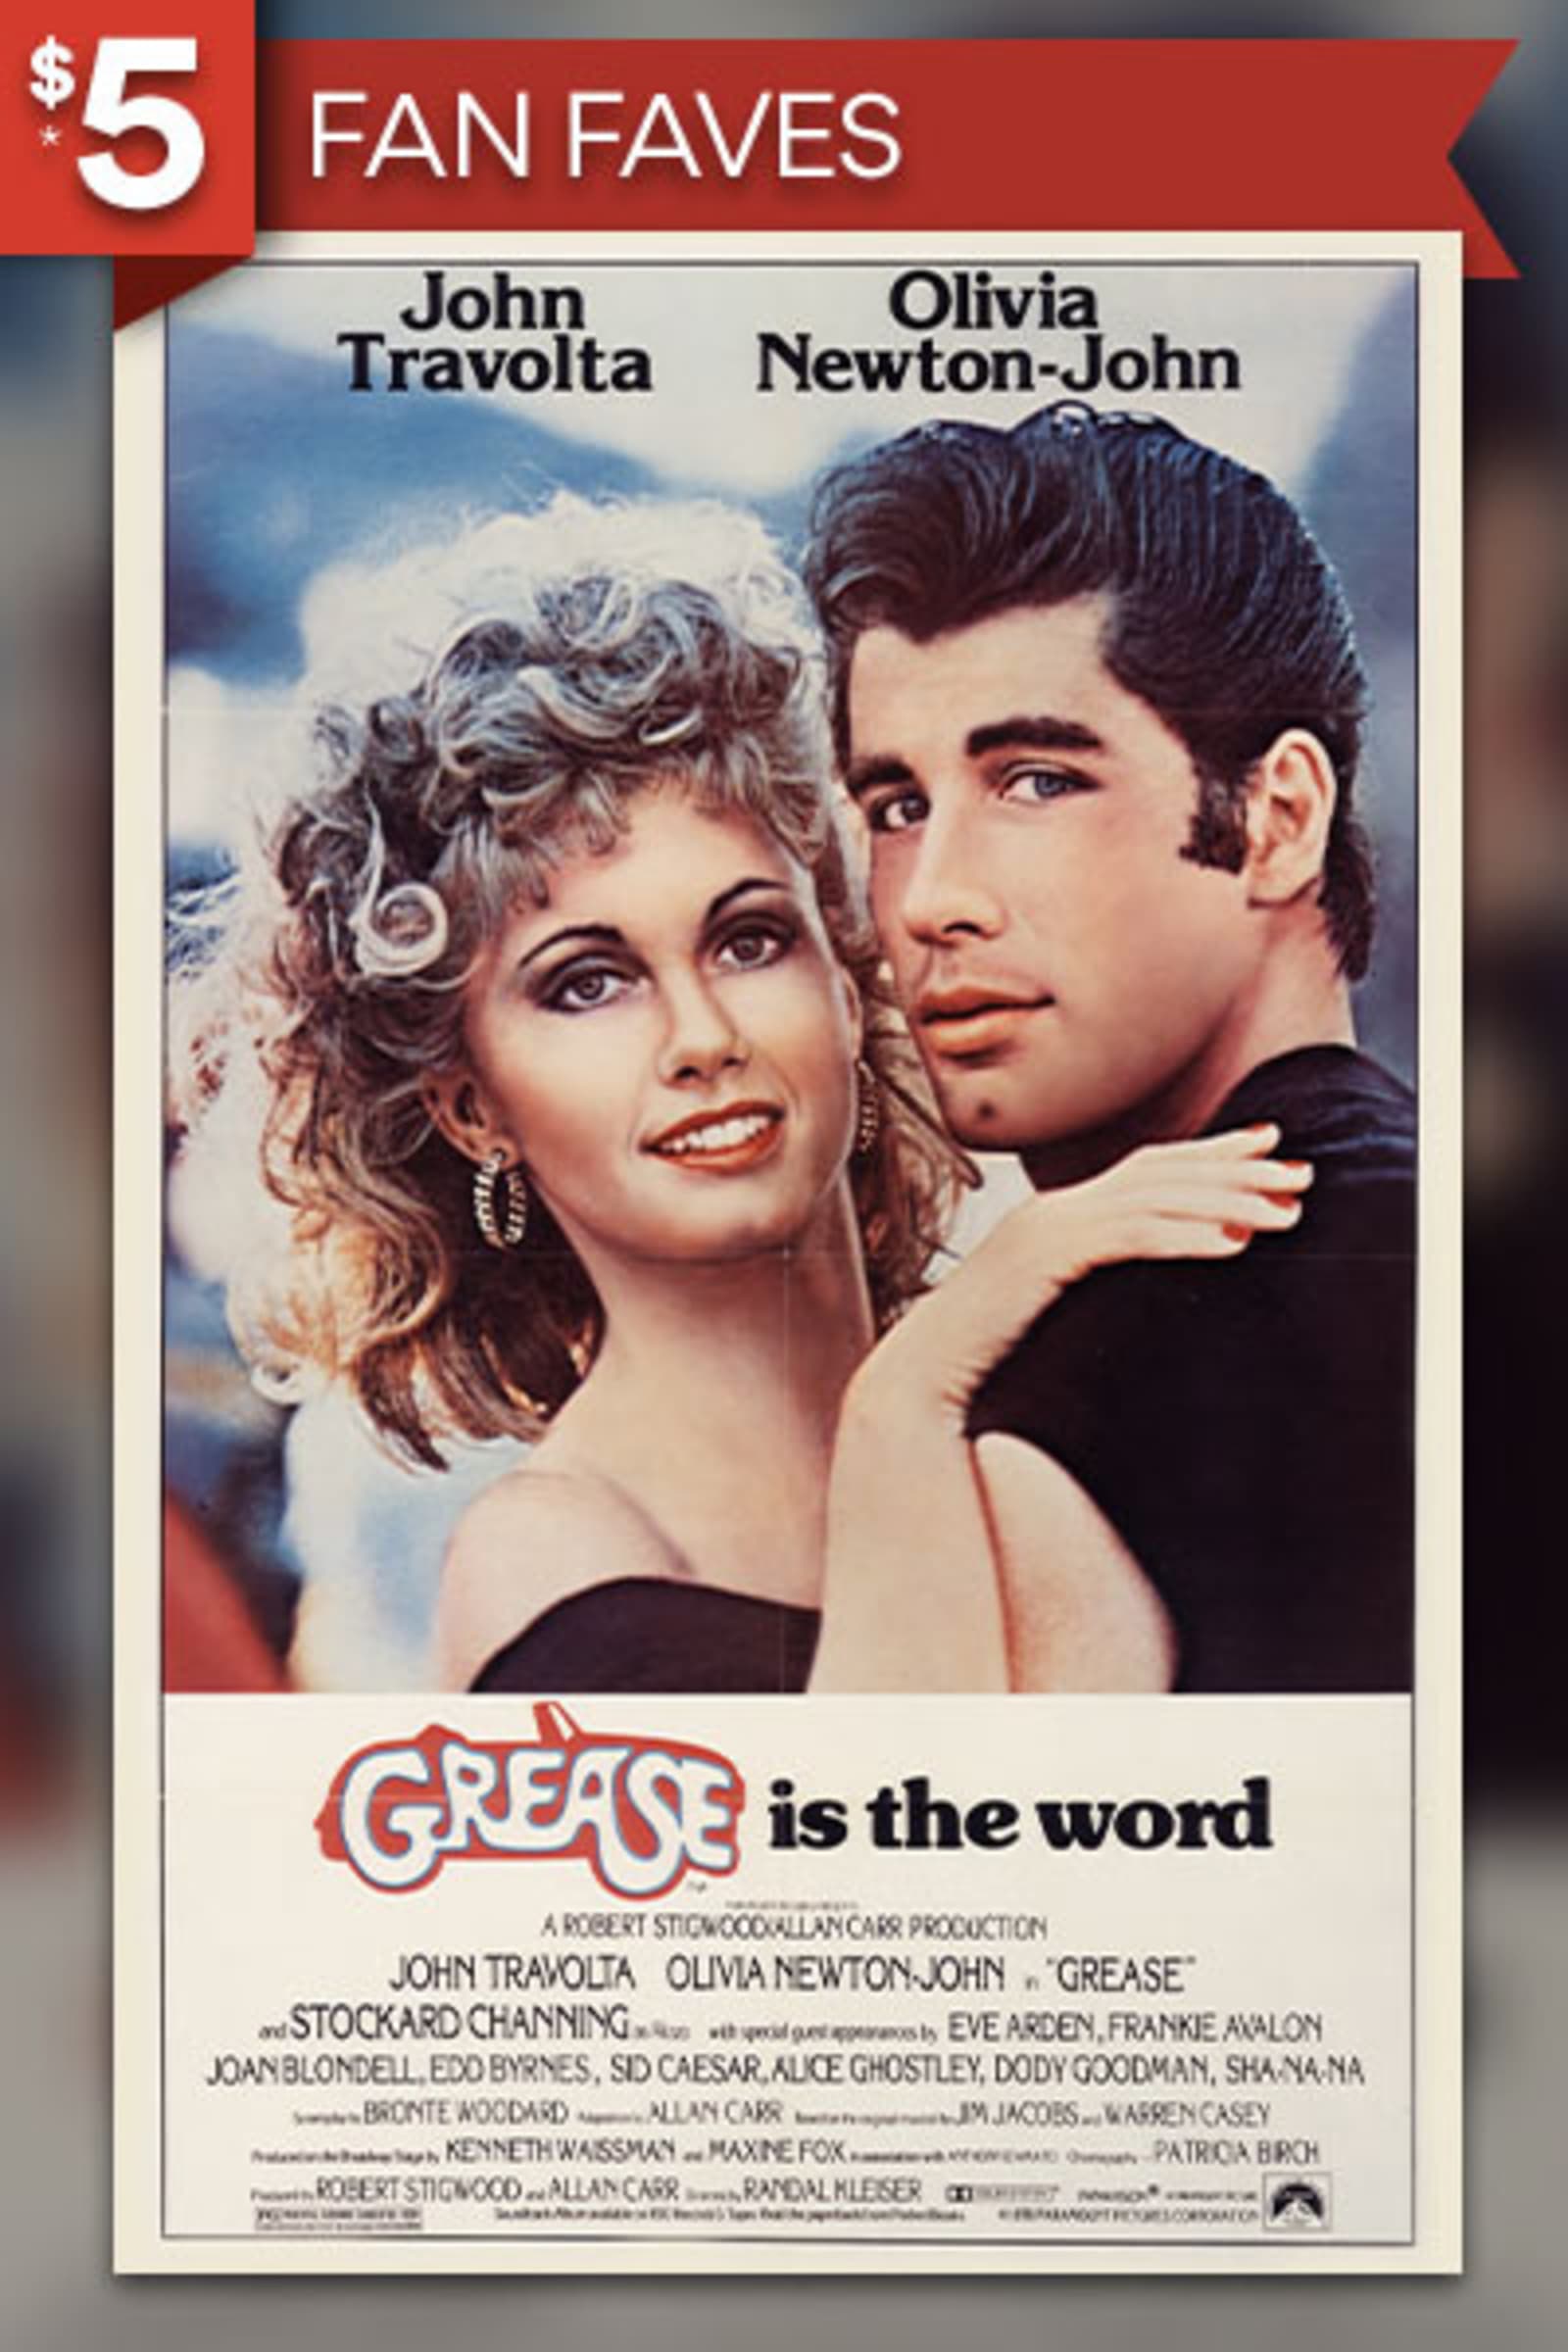 AMC Theatres $5 Fan Faves: Grease (1978) Movie Ticket